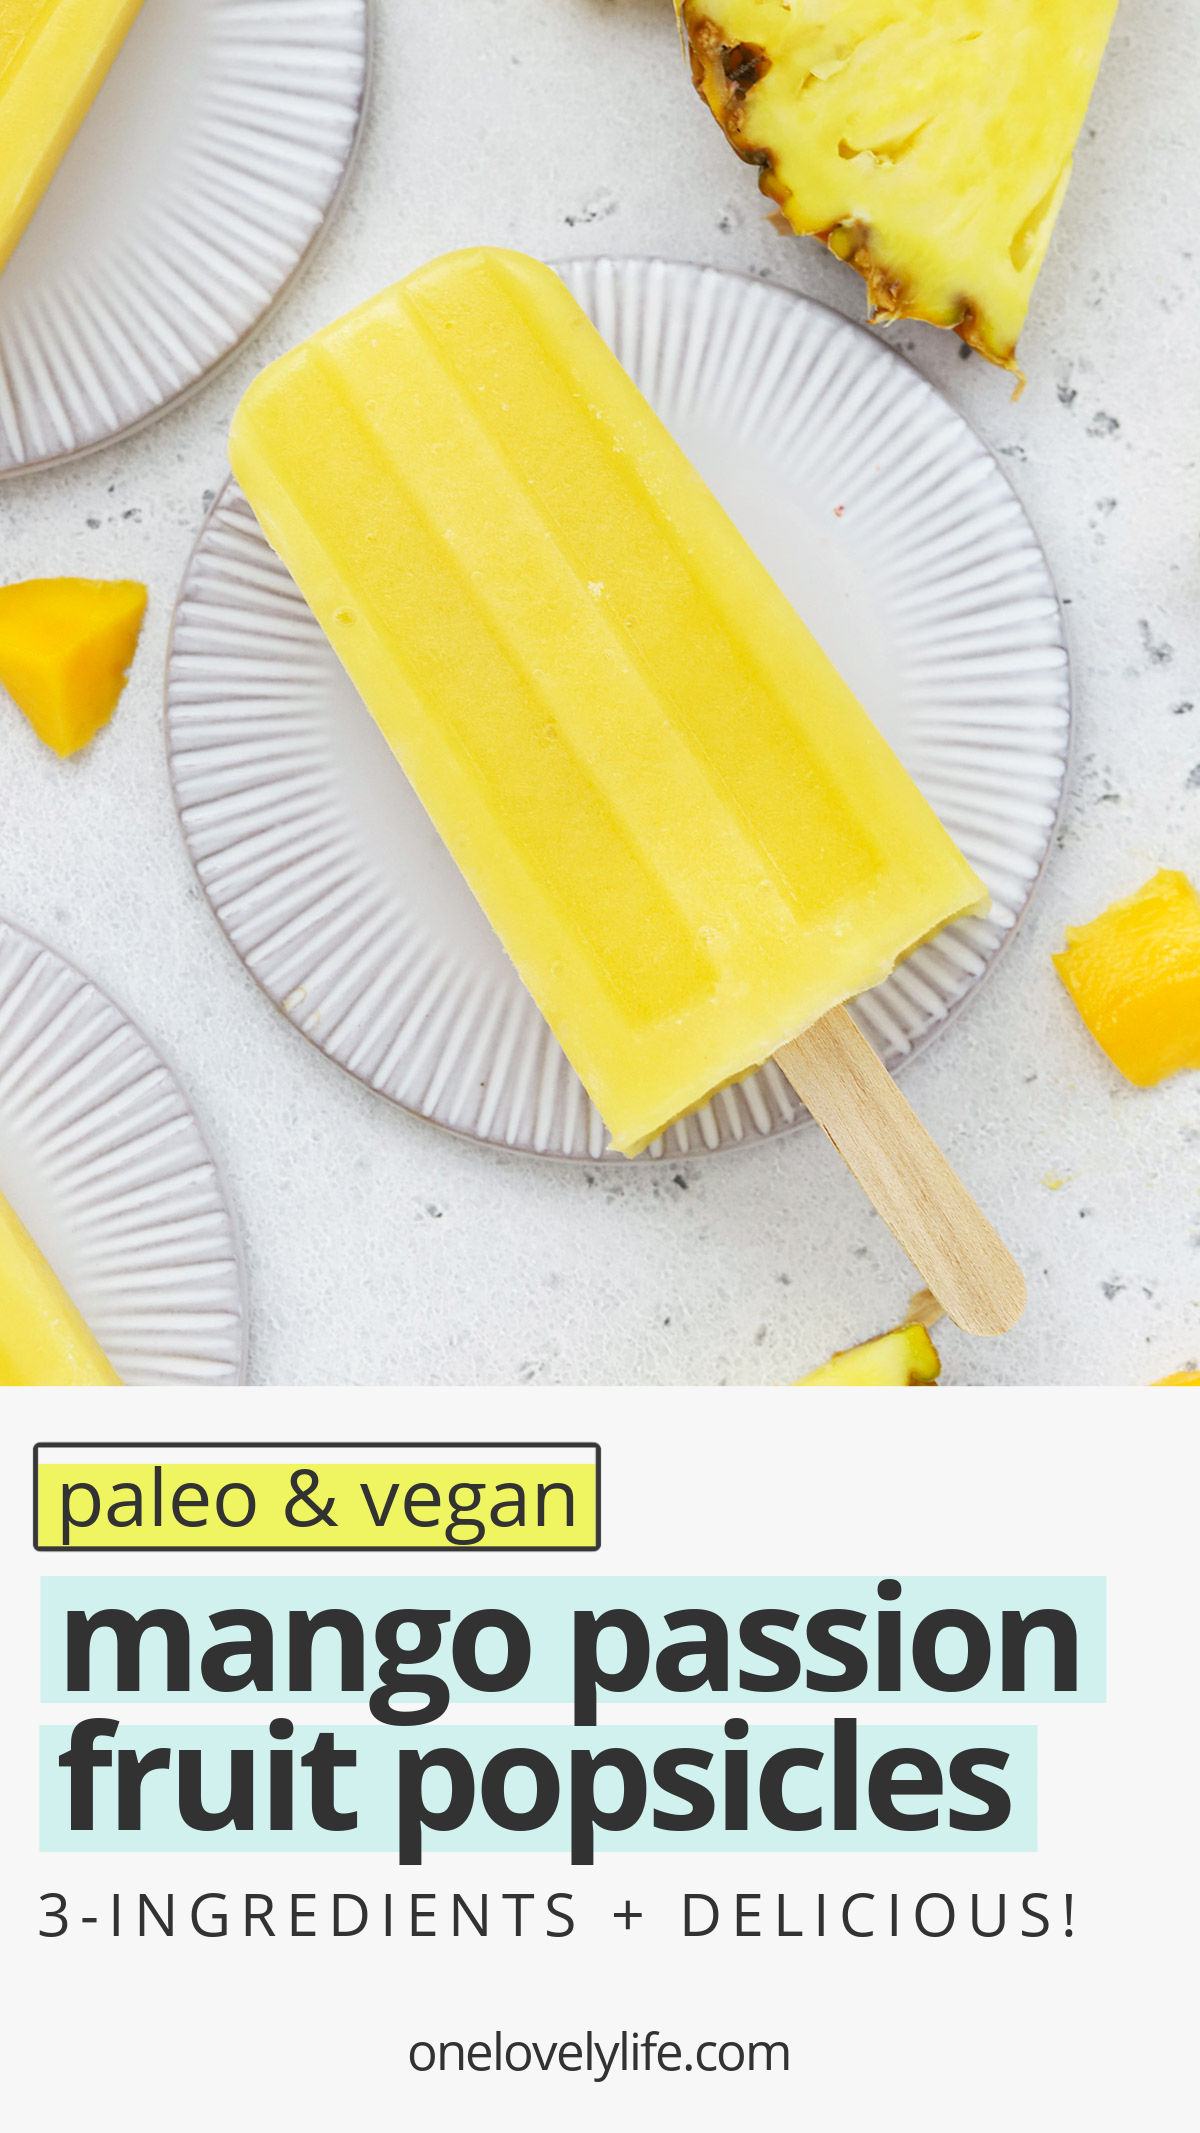 Mango Passion Fruit Popsicles - These refreshing mango popsicles taste like a tropical vacation! They're perfect healthy popsicles for a hot day. (Paleo, Vegan) // Mango Passionfruit Popsicles // Paleo popsicles // fruit popsicles // tropical popsicles // vegan popsicles // yellow popsicles